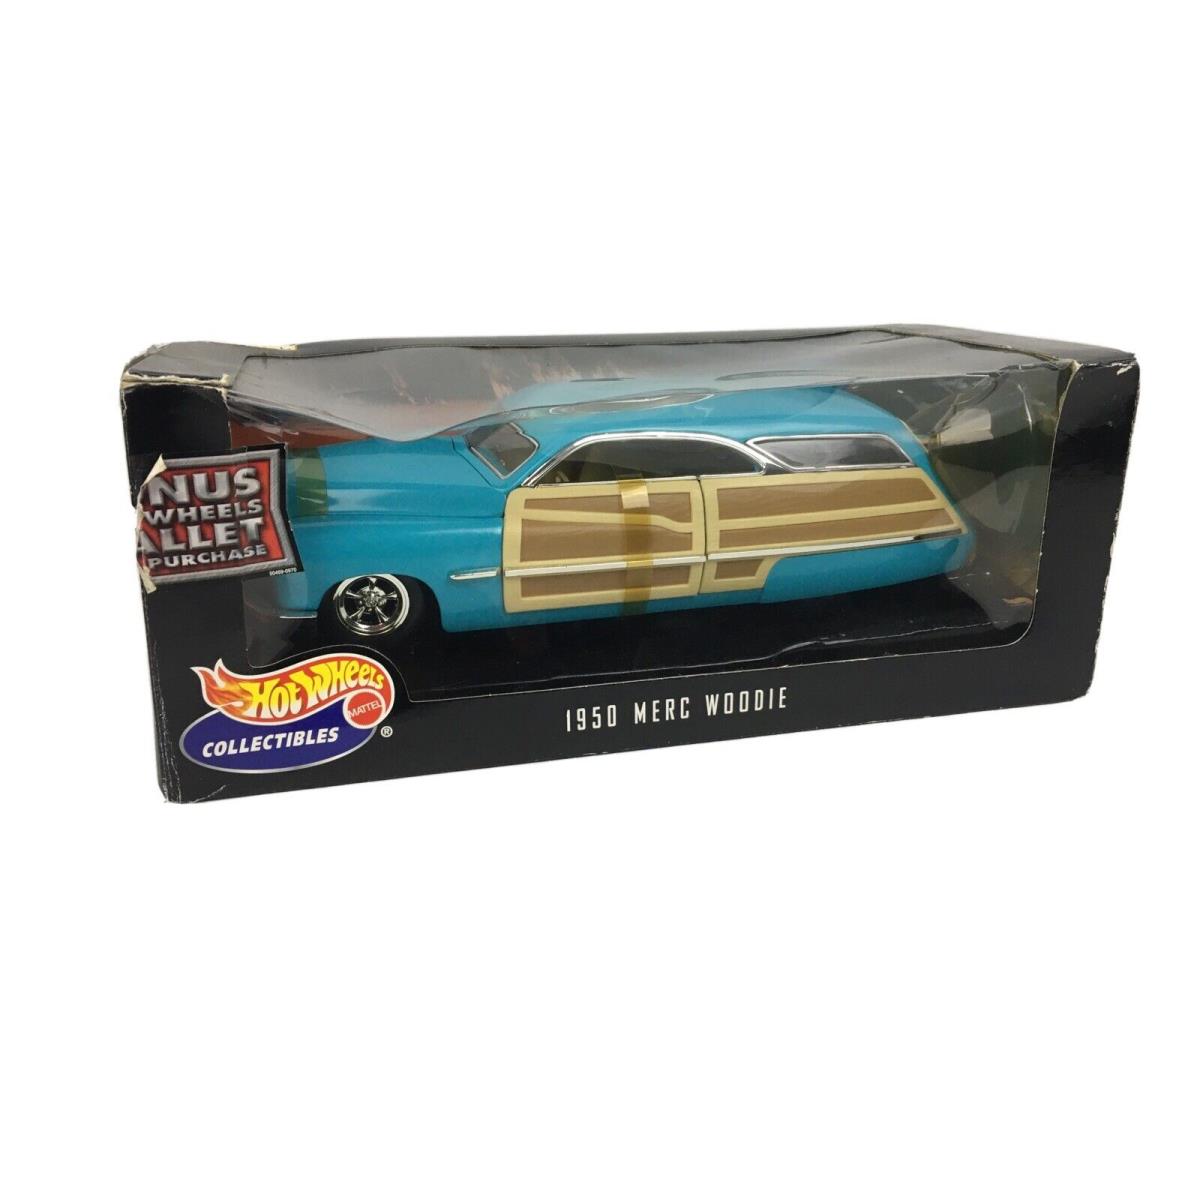 Hot Wheels Collectibles 1950 Merc Woodie Surfing 1:18 Die Cast - Multicolor